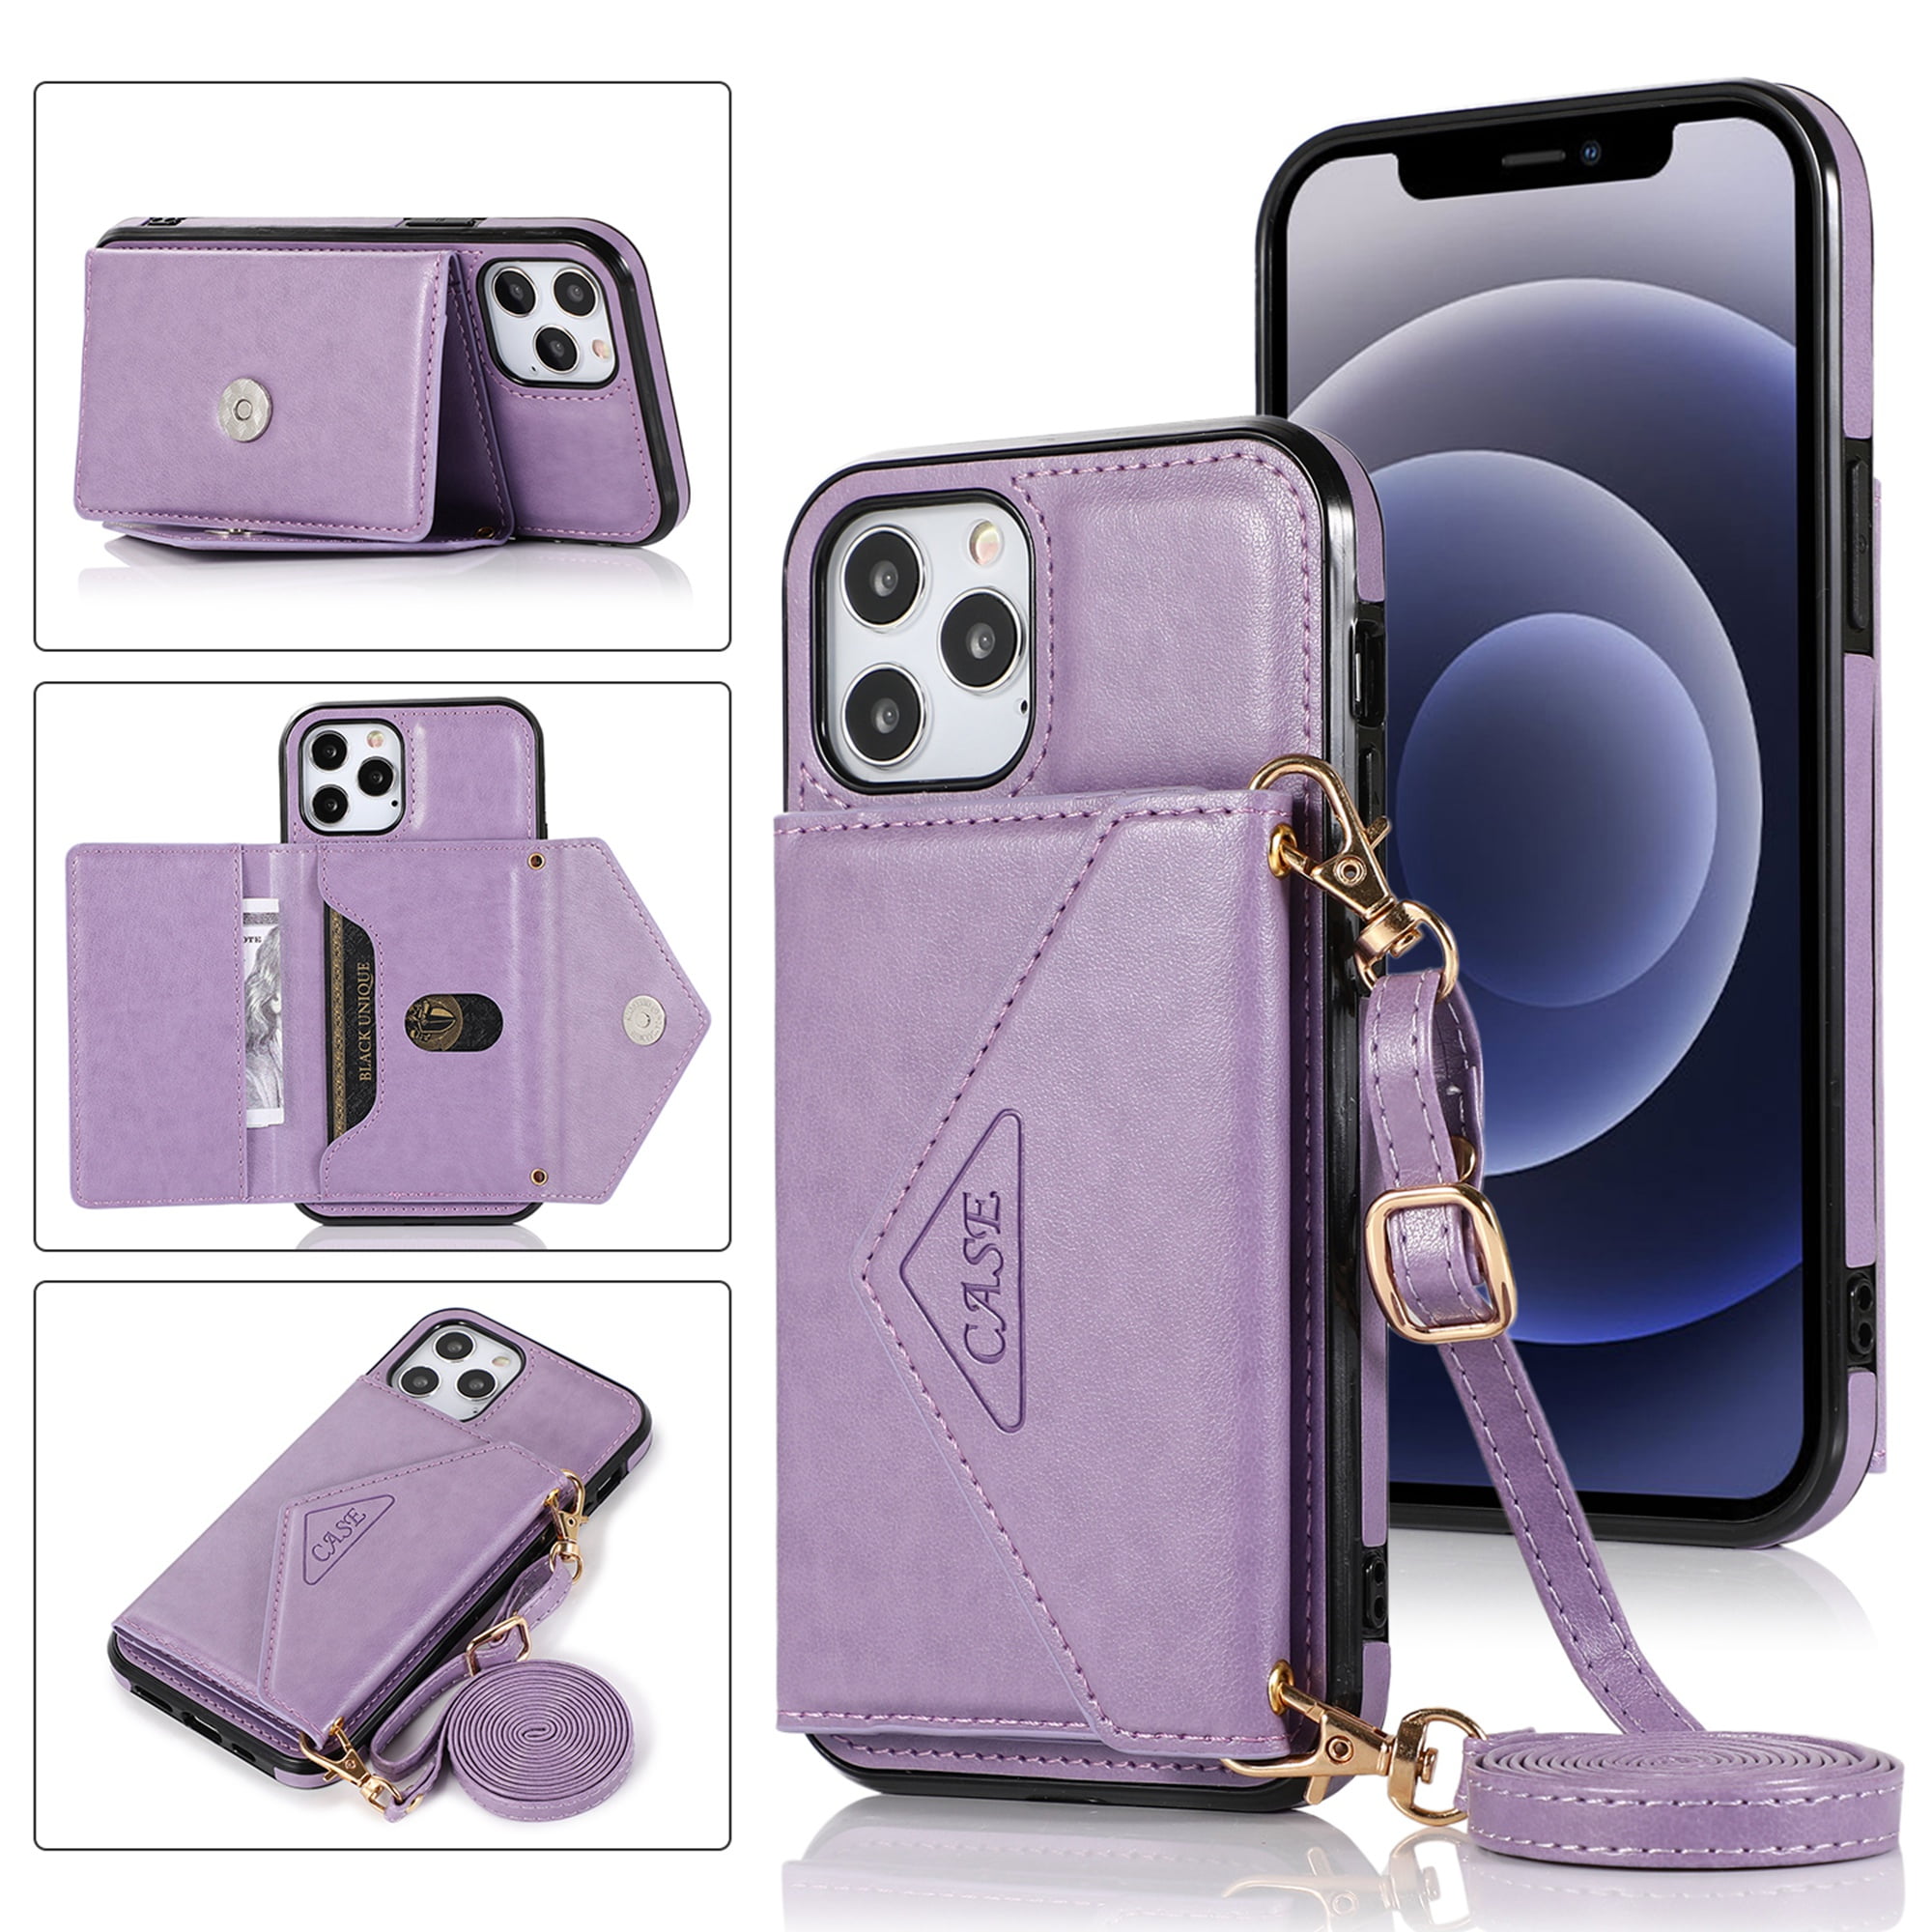 Techcircle Phone Case for iPhone 12 Pro Max, Dual Layer Lightweight Premium Leather, with Card Slots Magnetic Lock Folio Flip Protective Classic Business Case